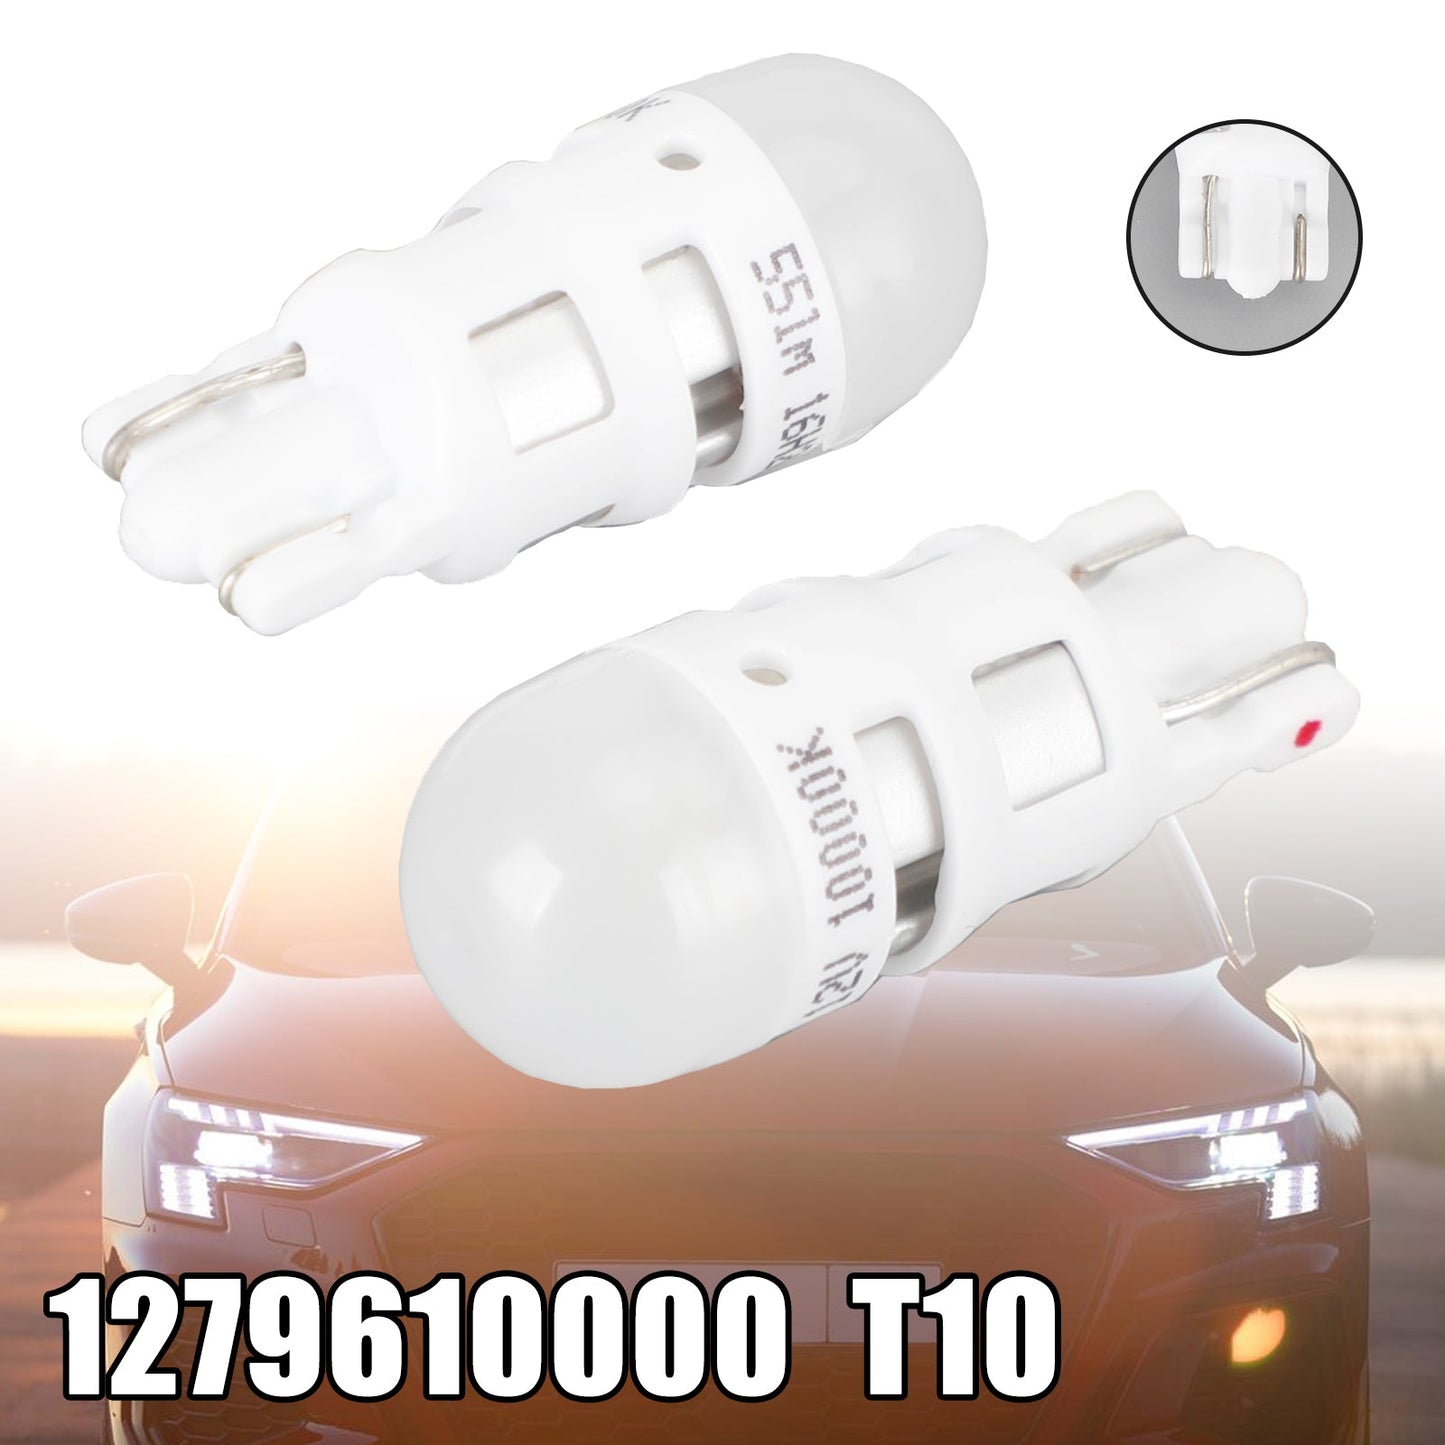 For Philips 1279610000X2 Car X-treme Ultinon LED T10 12V1W W2.1*9.6D 55LM